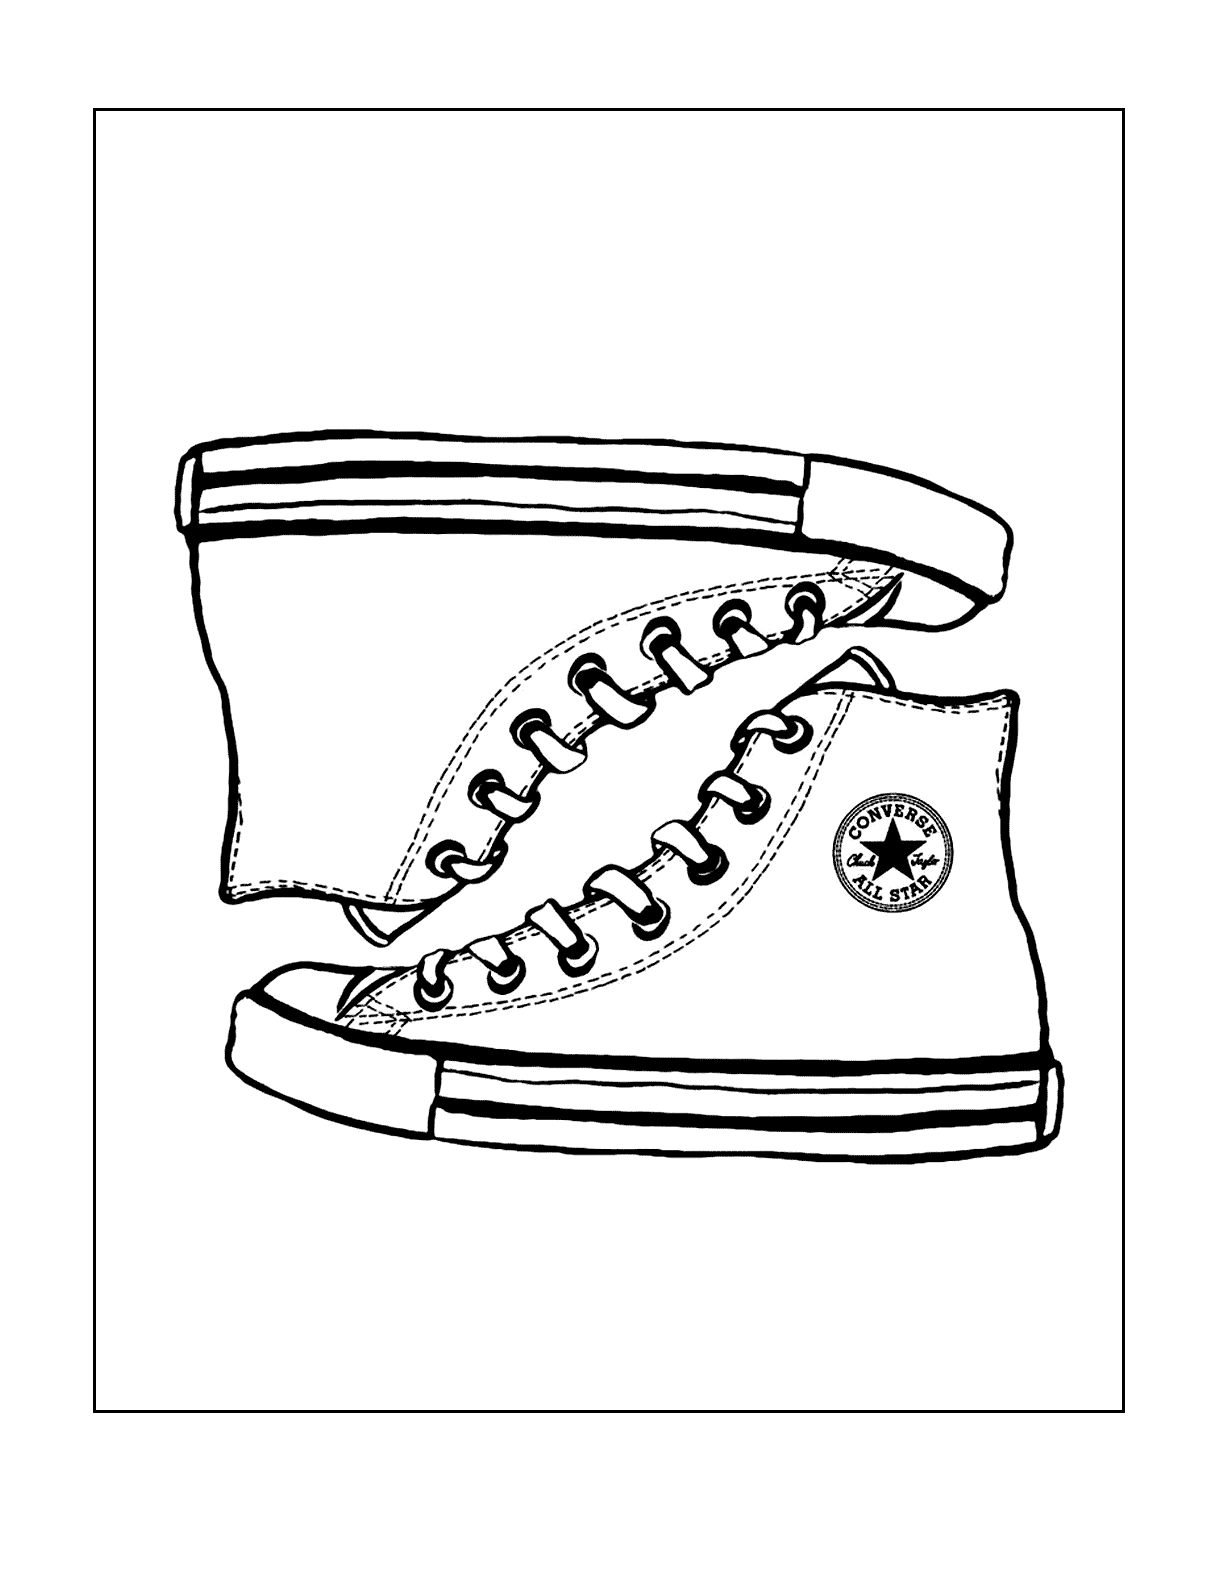 Converse High Tops Coloring Page